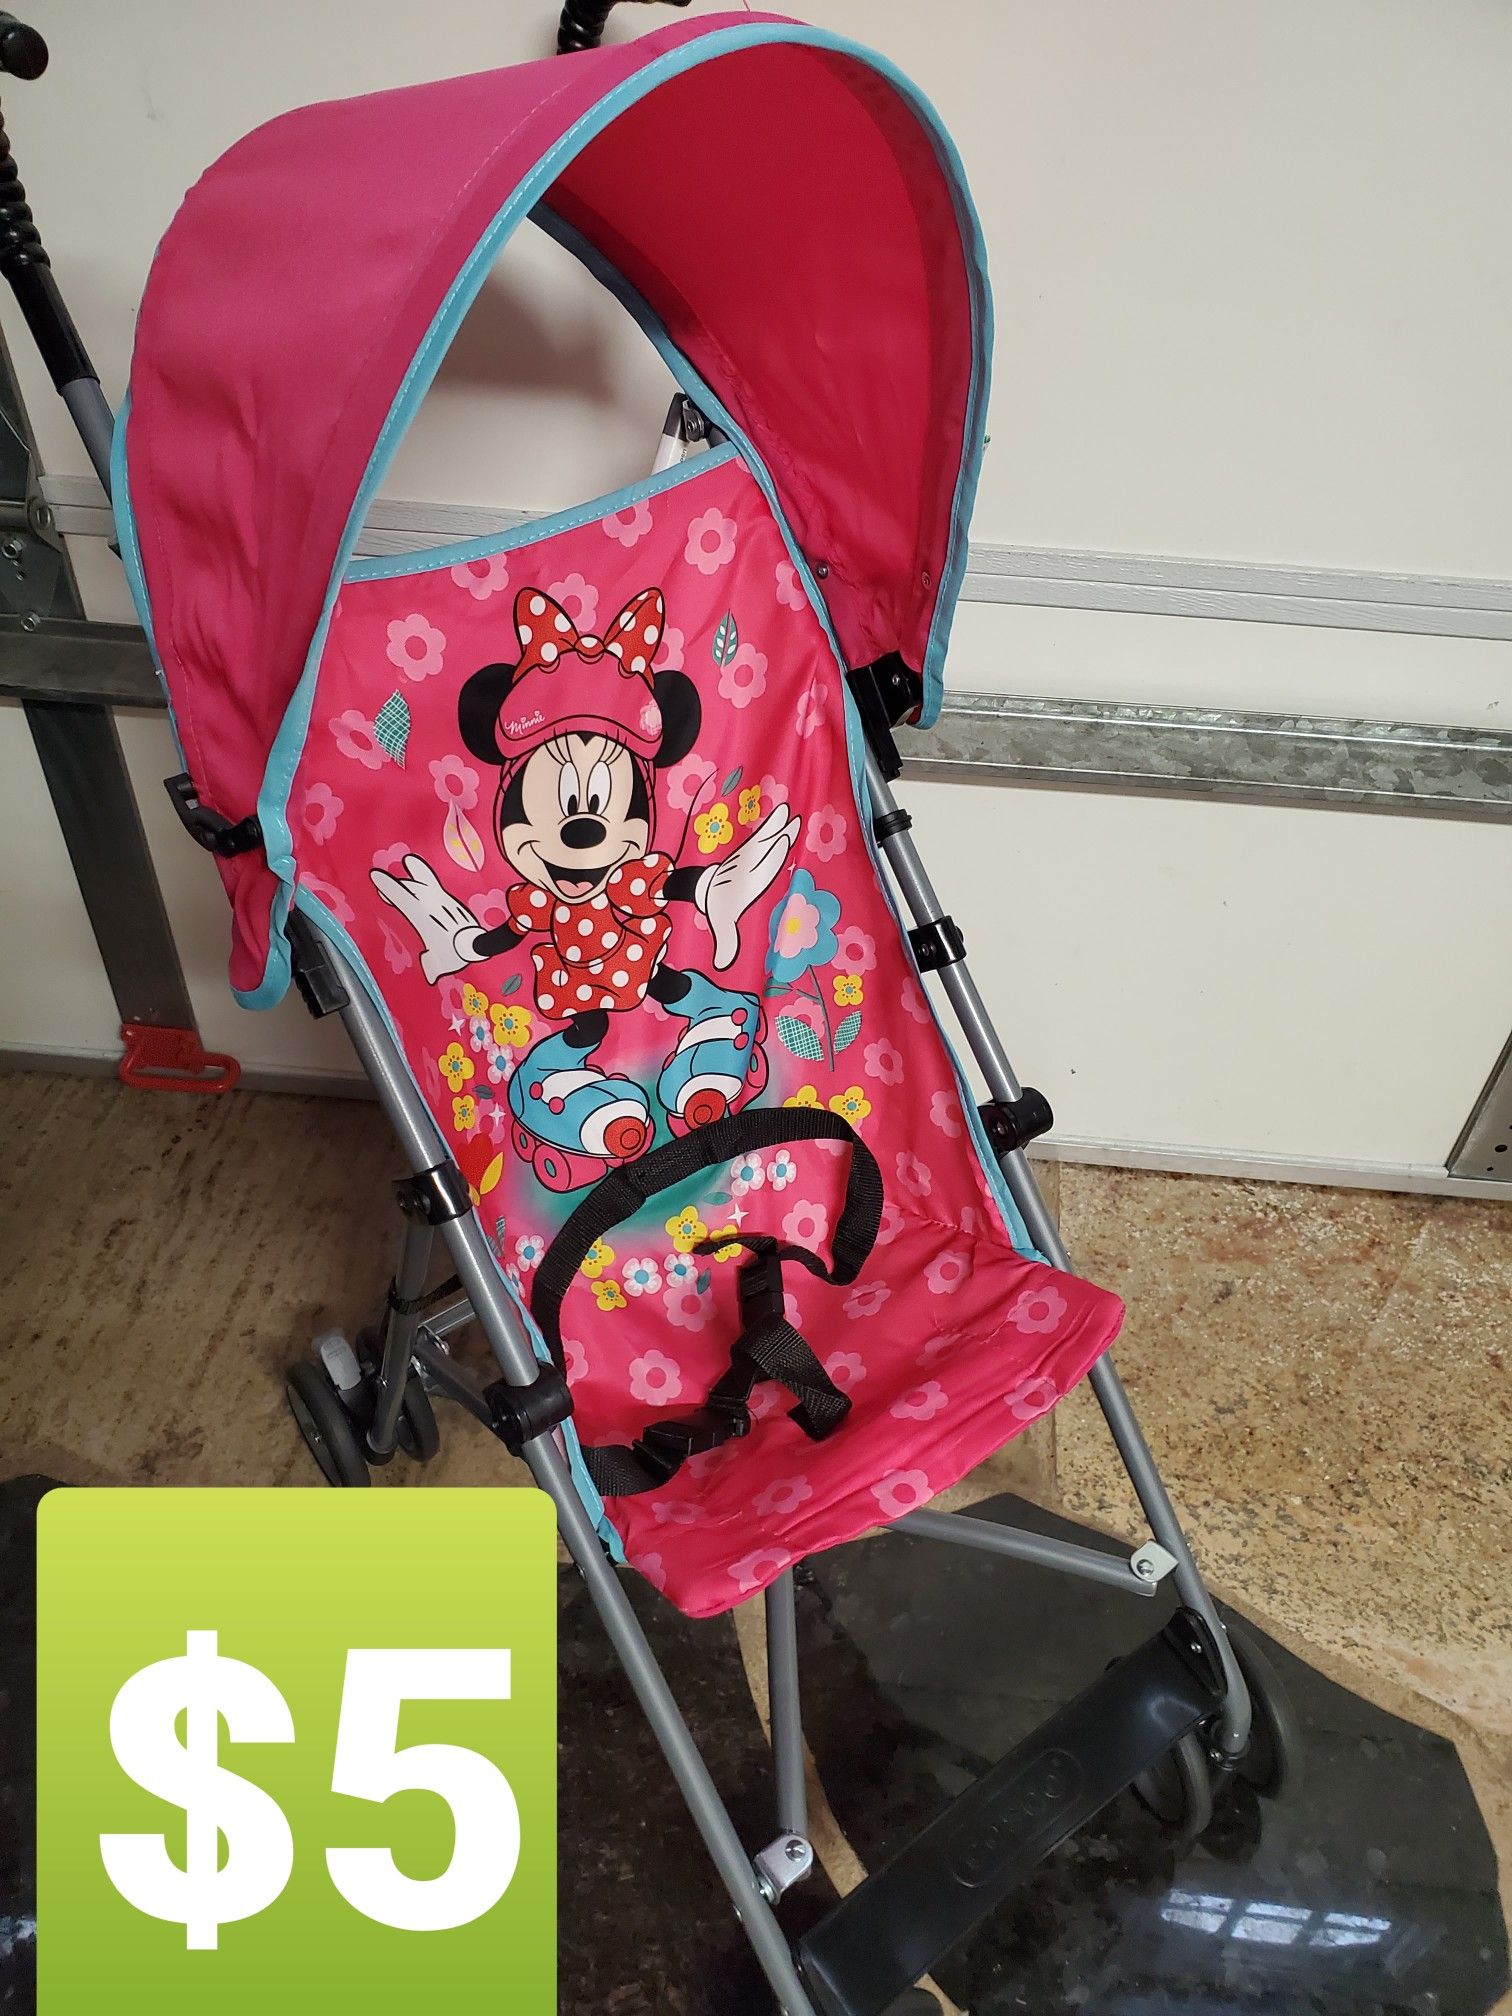 MINNIE MOUSE STROLLER $5